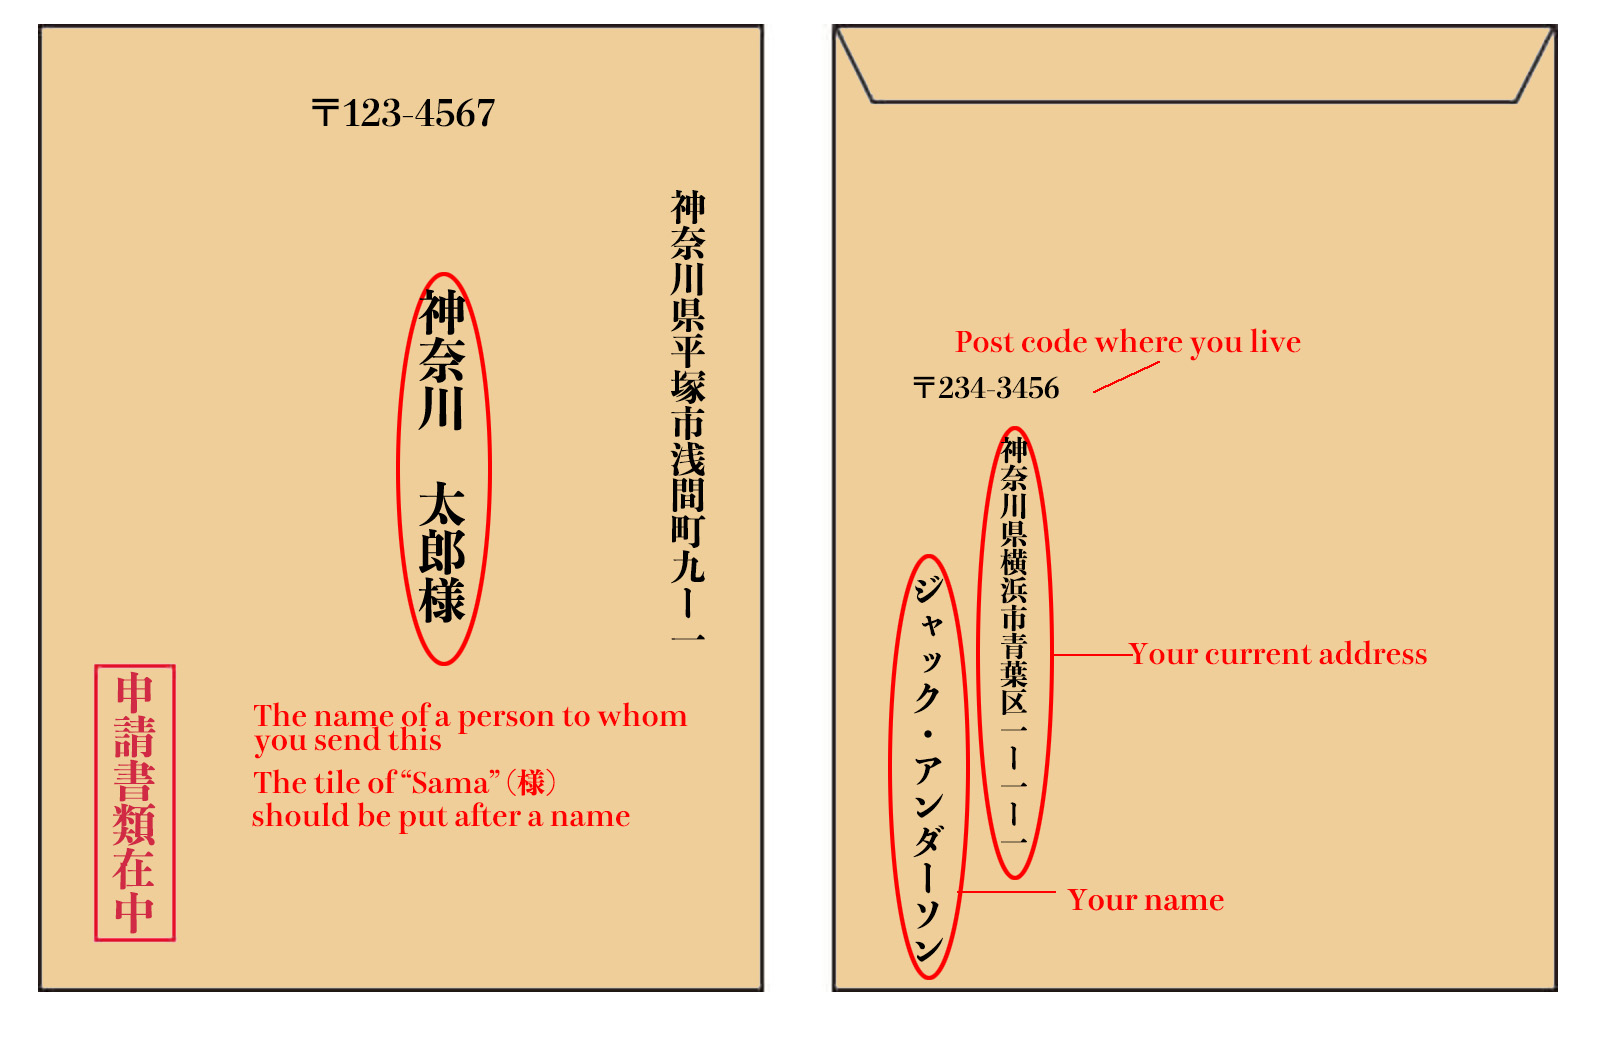 How to write on an envelop in Japan?